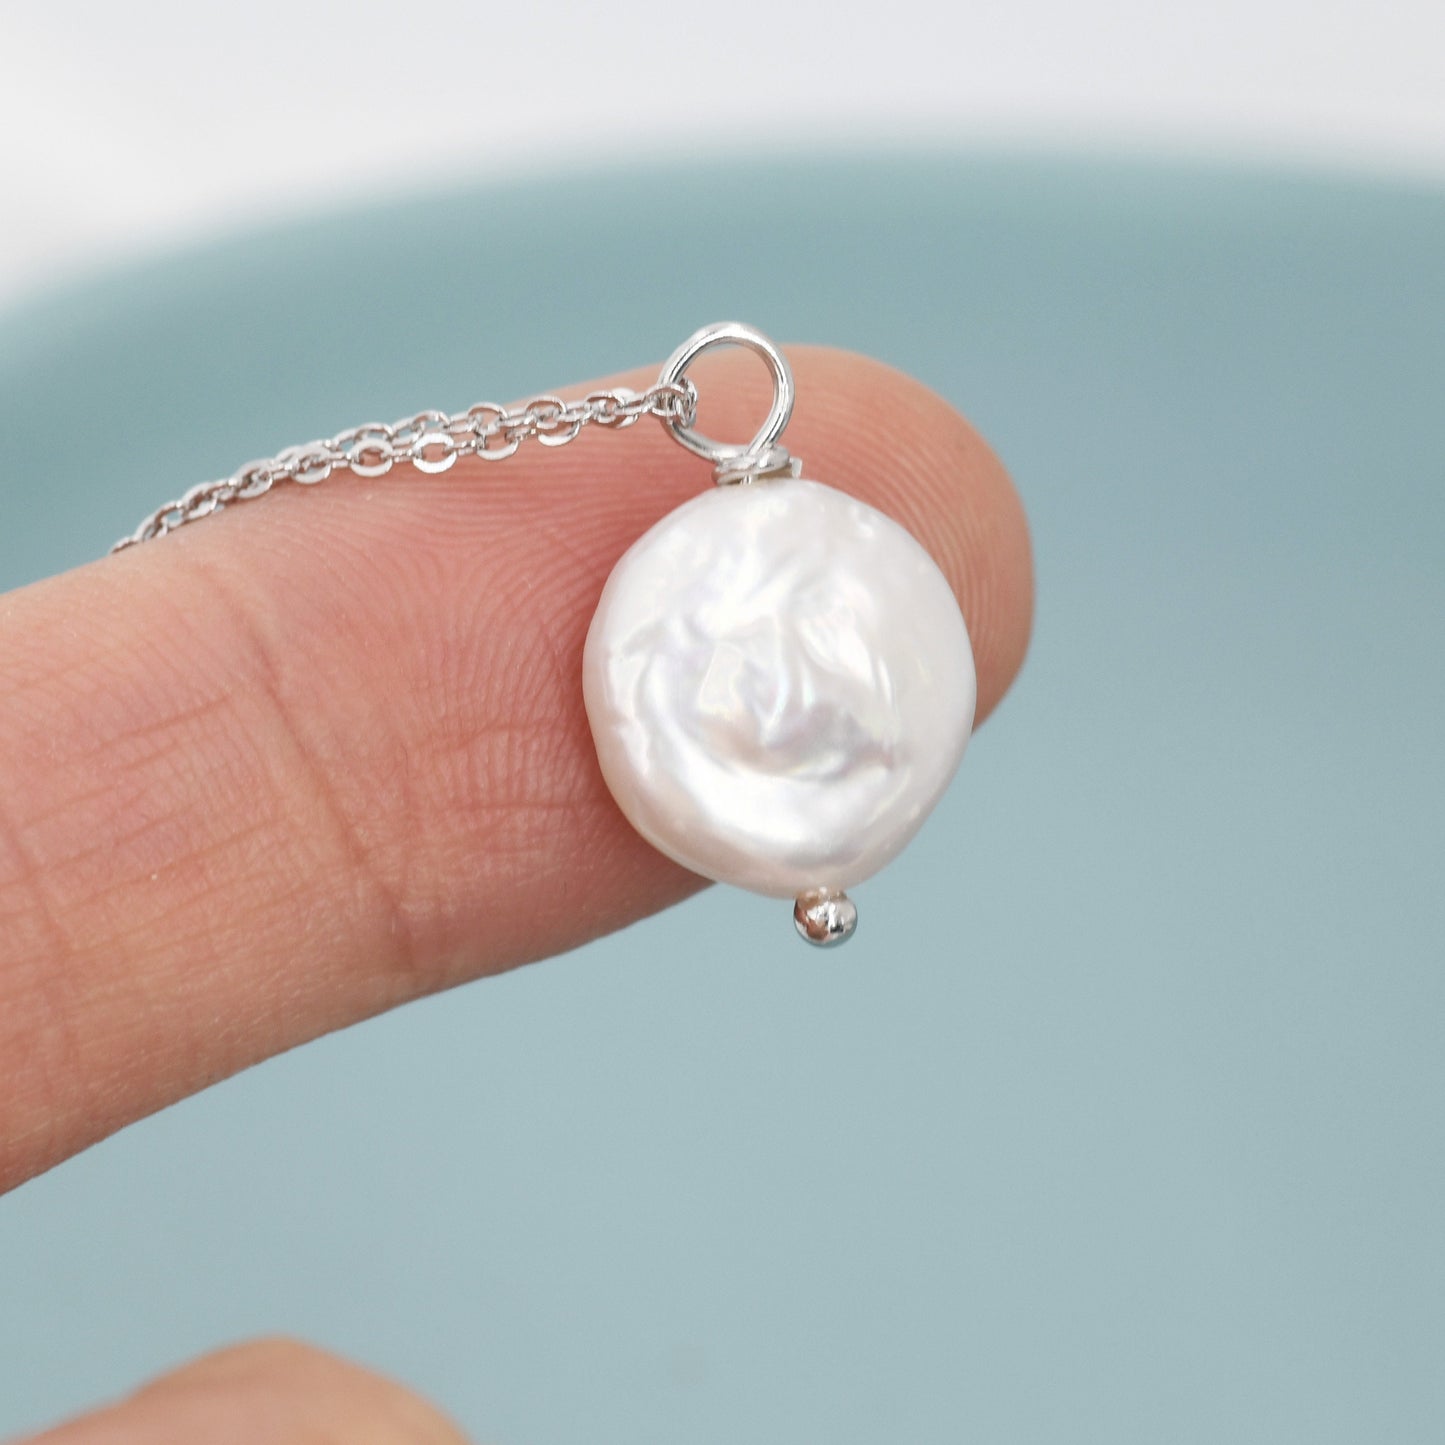 Coin Baroque Pearl Necklace in Sterling Silver, Keshi Pearl Necklace, Natural Freshwater Pearl Necklace